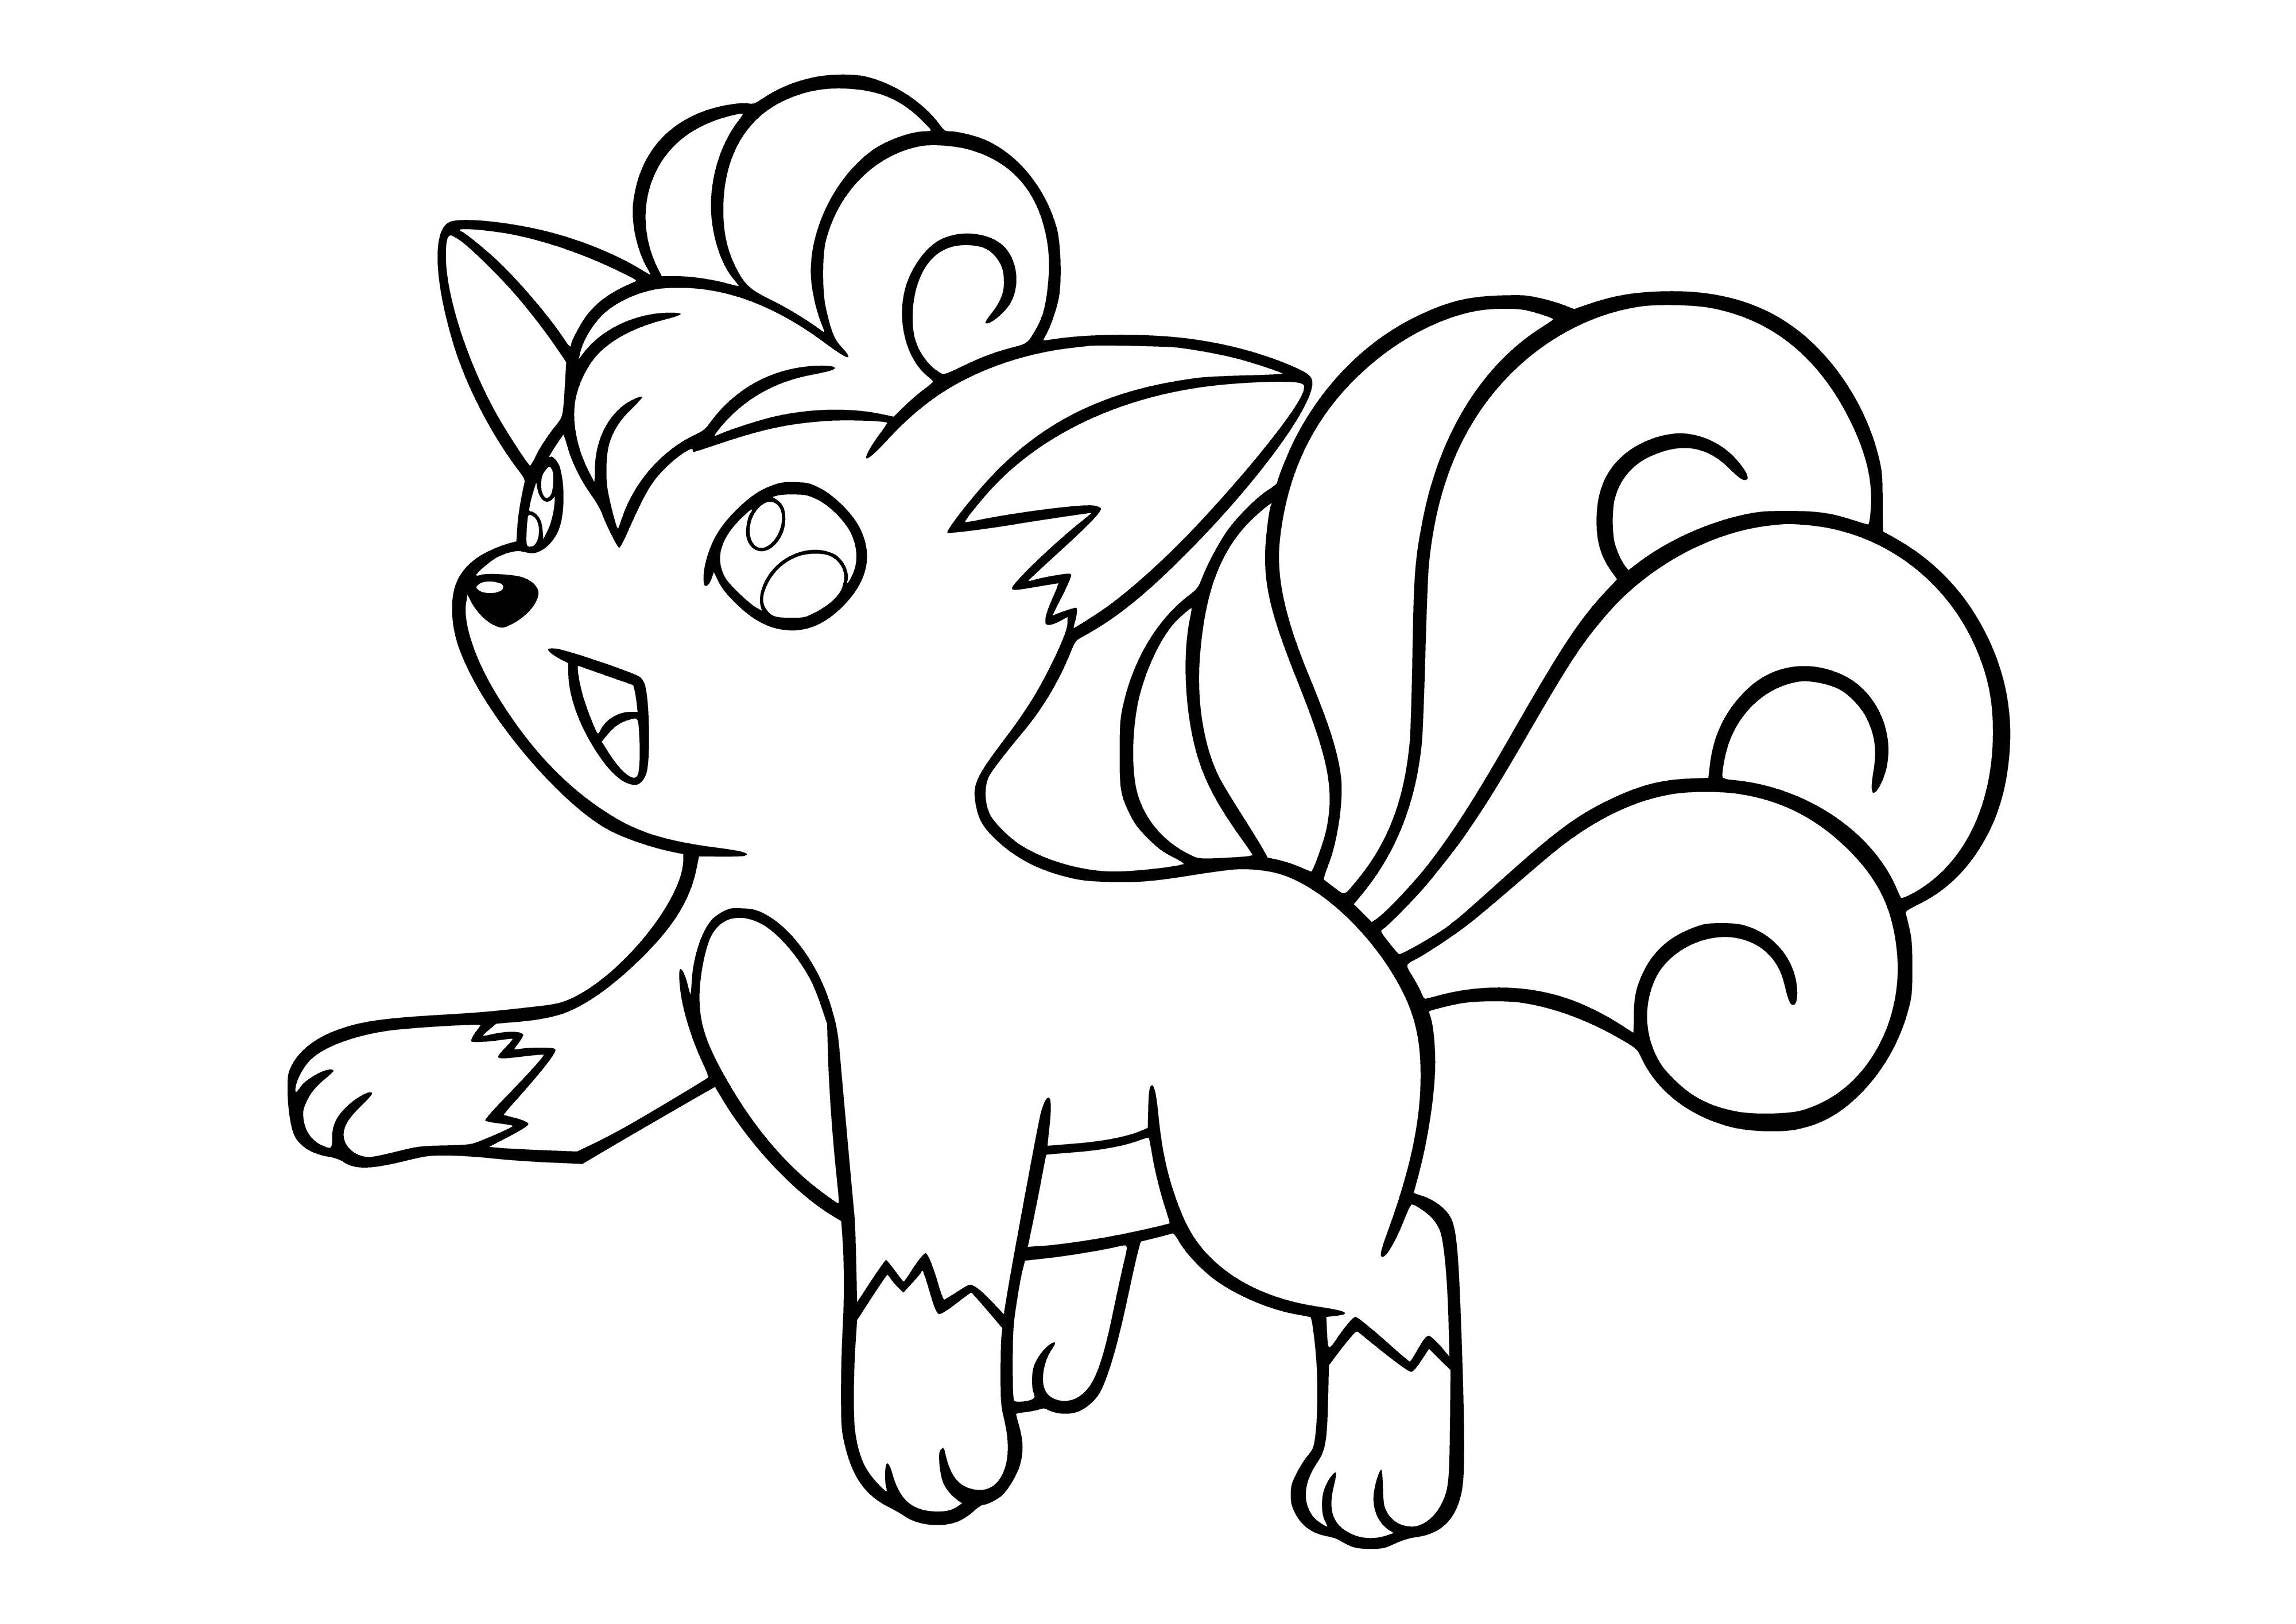 coloring page: Vulpix is a fox-like Pokemon with red-brown fur, six yellow-tipped tails, yellow eyes & black nose.